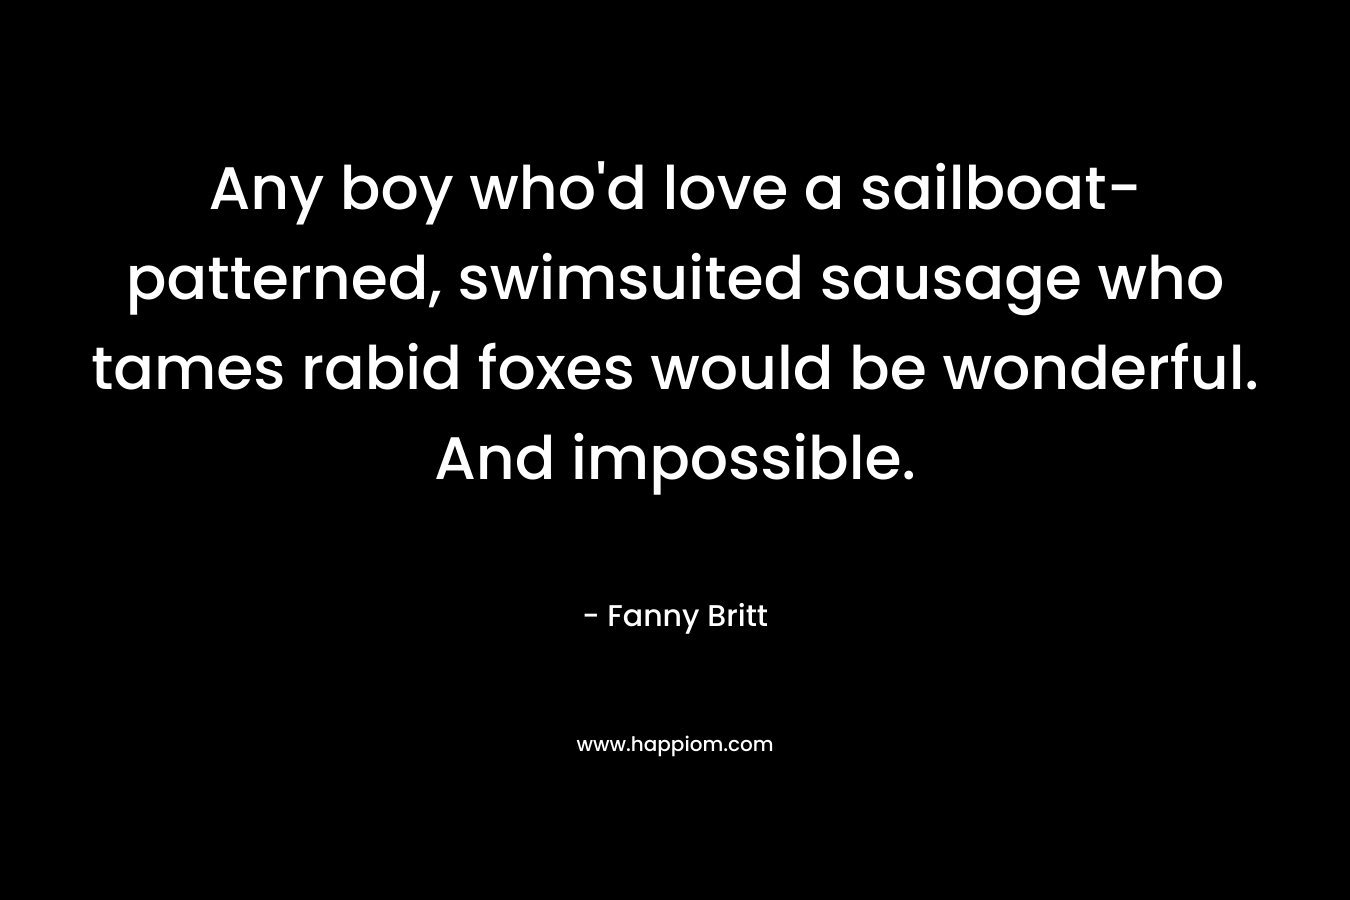 Any boy who'd love a sailboat-patterned, swimsuited sausage who tames rabid foxes would be wonderful. And impossible.